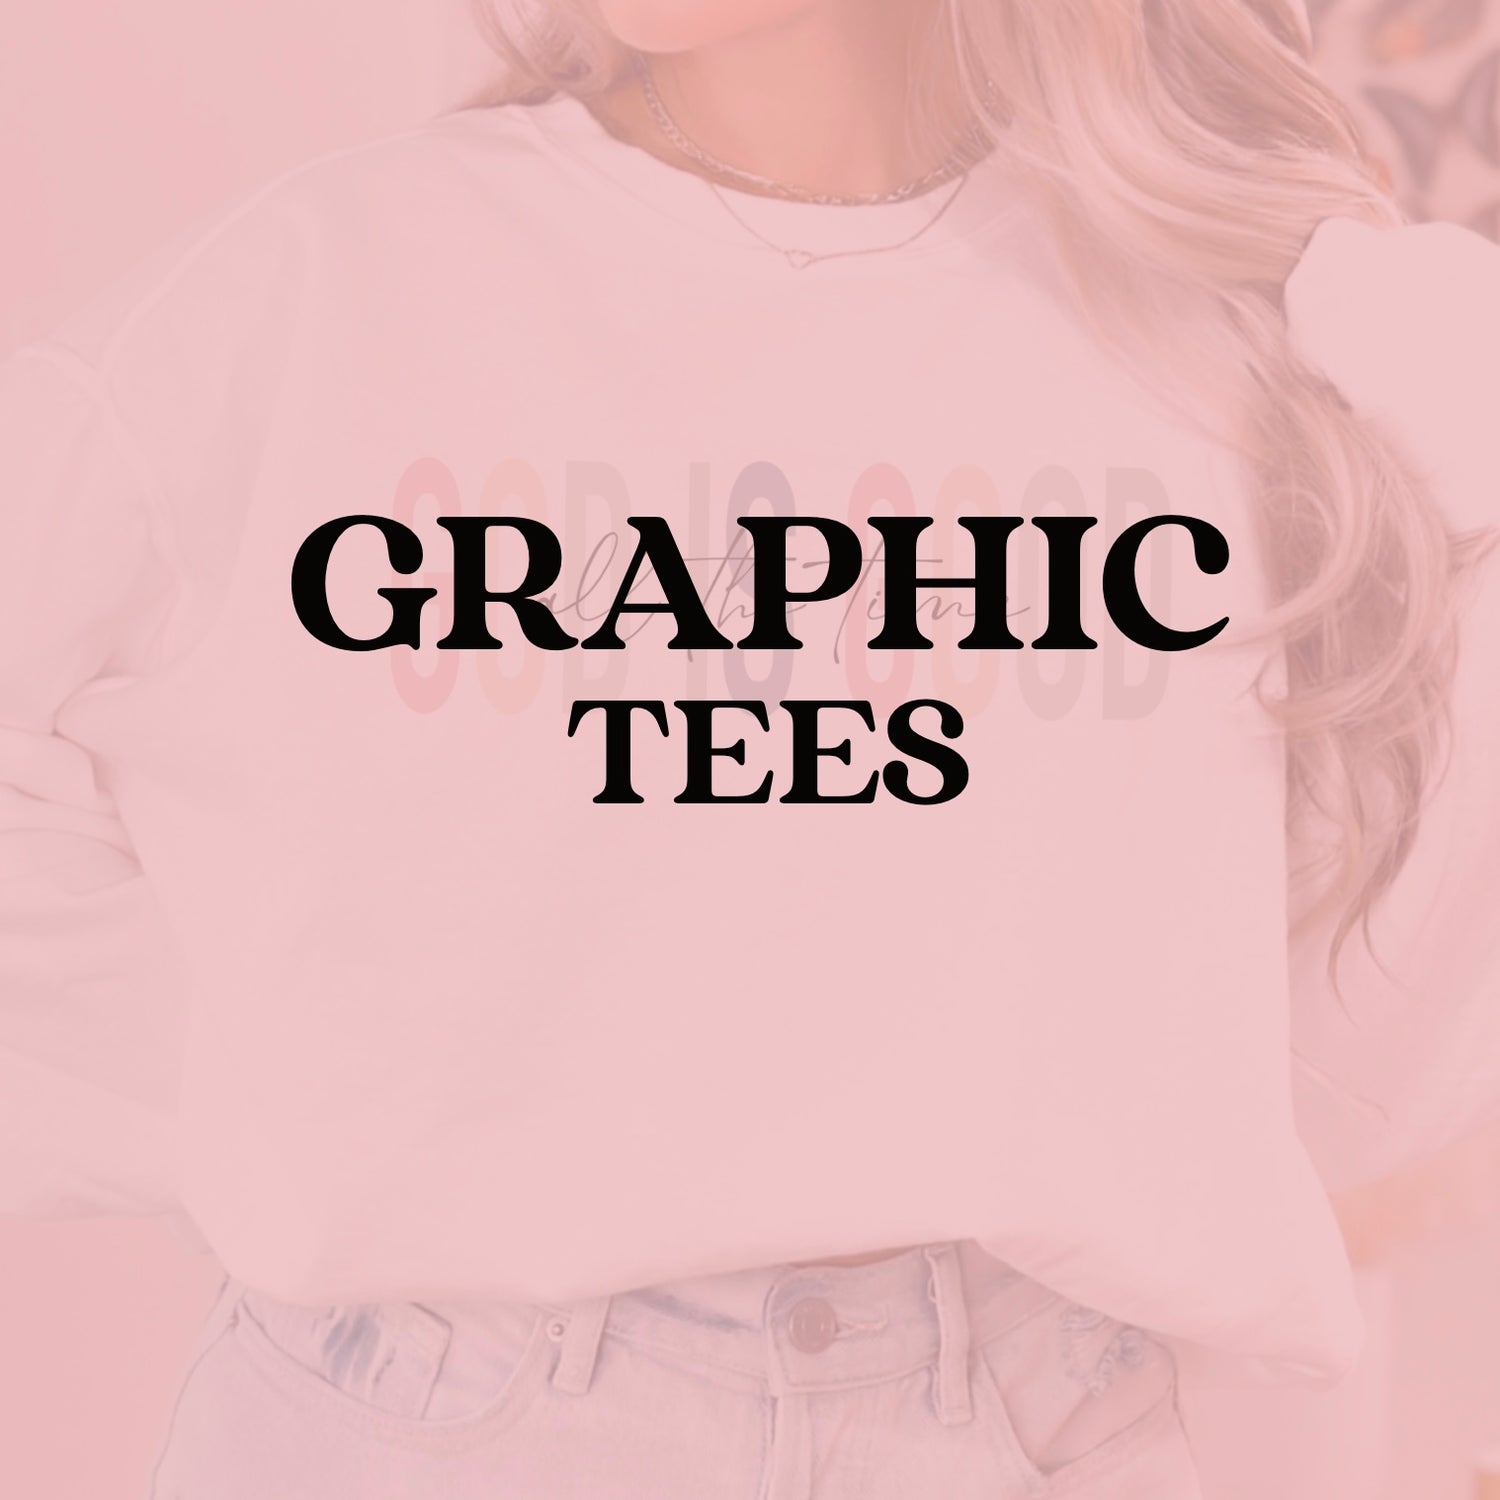 ALL GRAPHIC TEES - TAT 3-10 BUSINESS DAYS ADD 2 BUSINESS DAYS FOR ORDERS THAT HAVE 30+ TEES